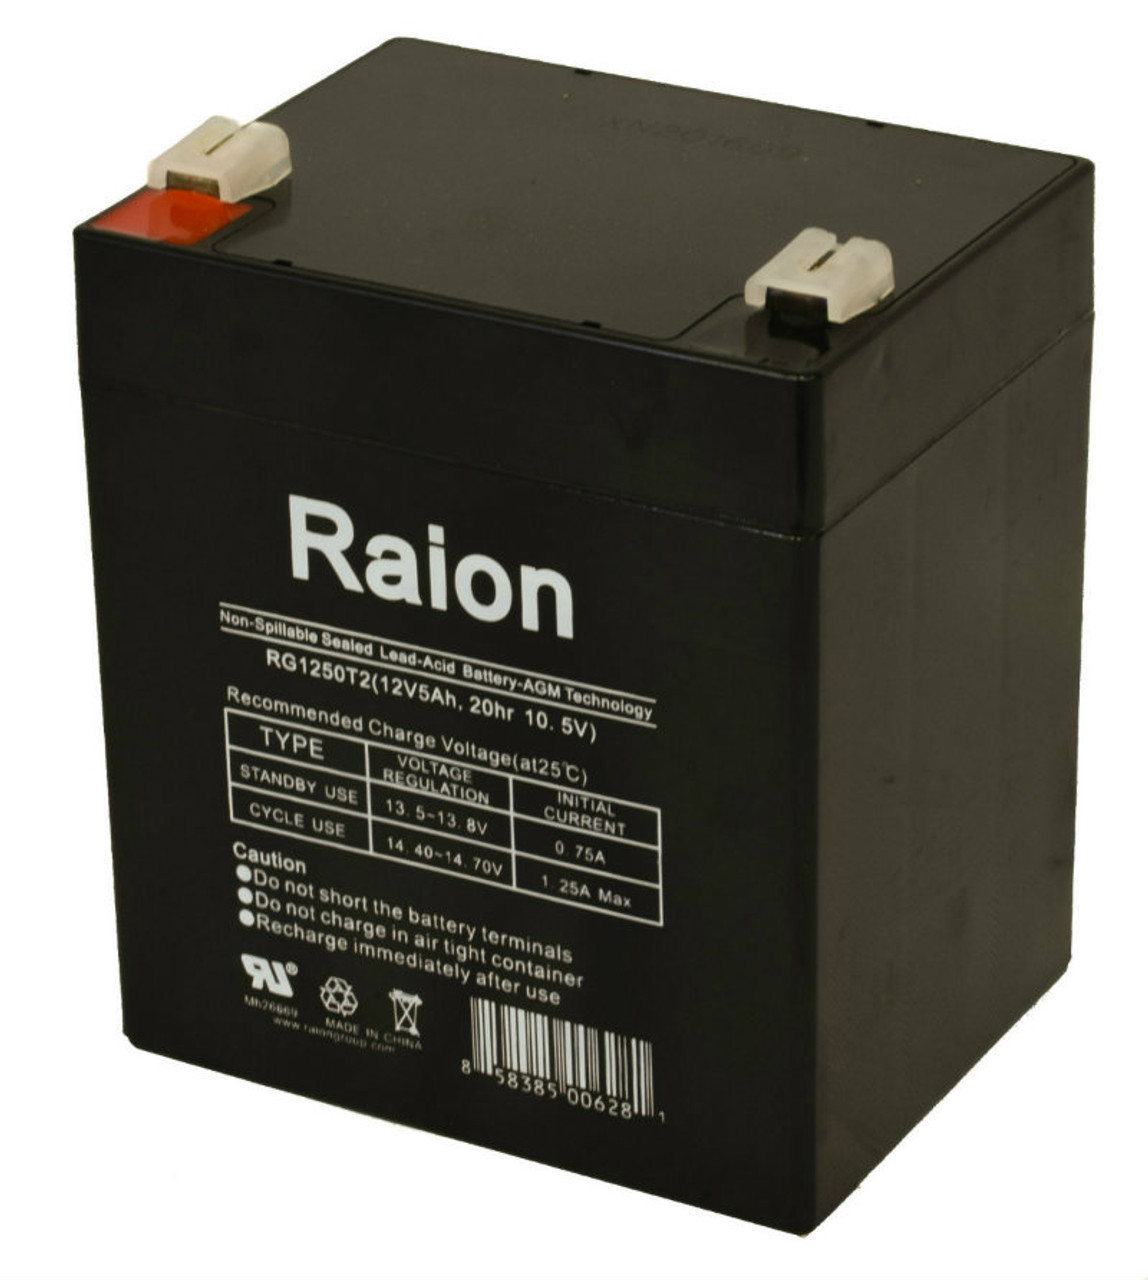 Raion Power RG1250T1 Replacement Alarm Security System Battery for Securitron DPA12